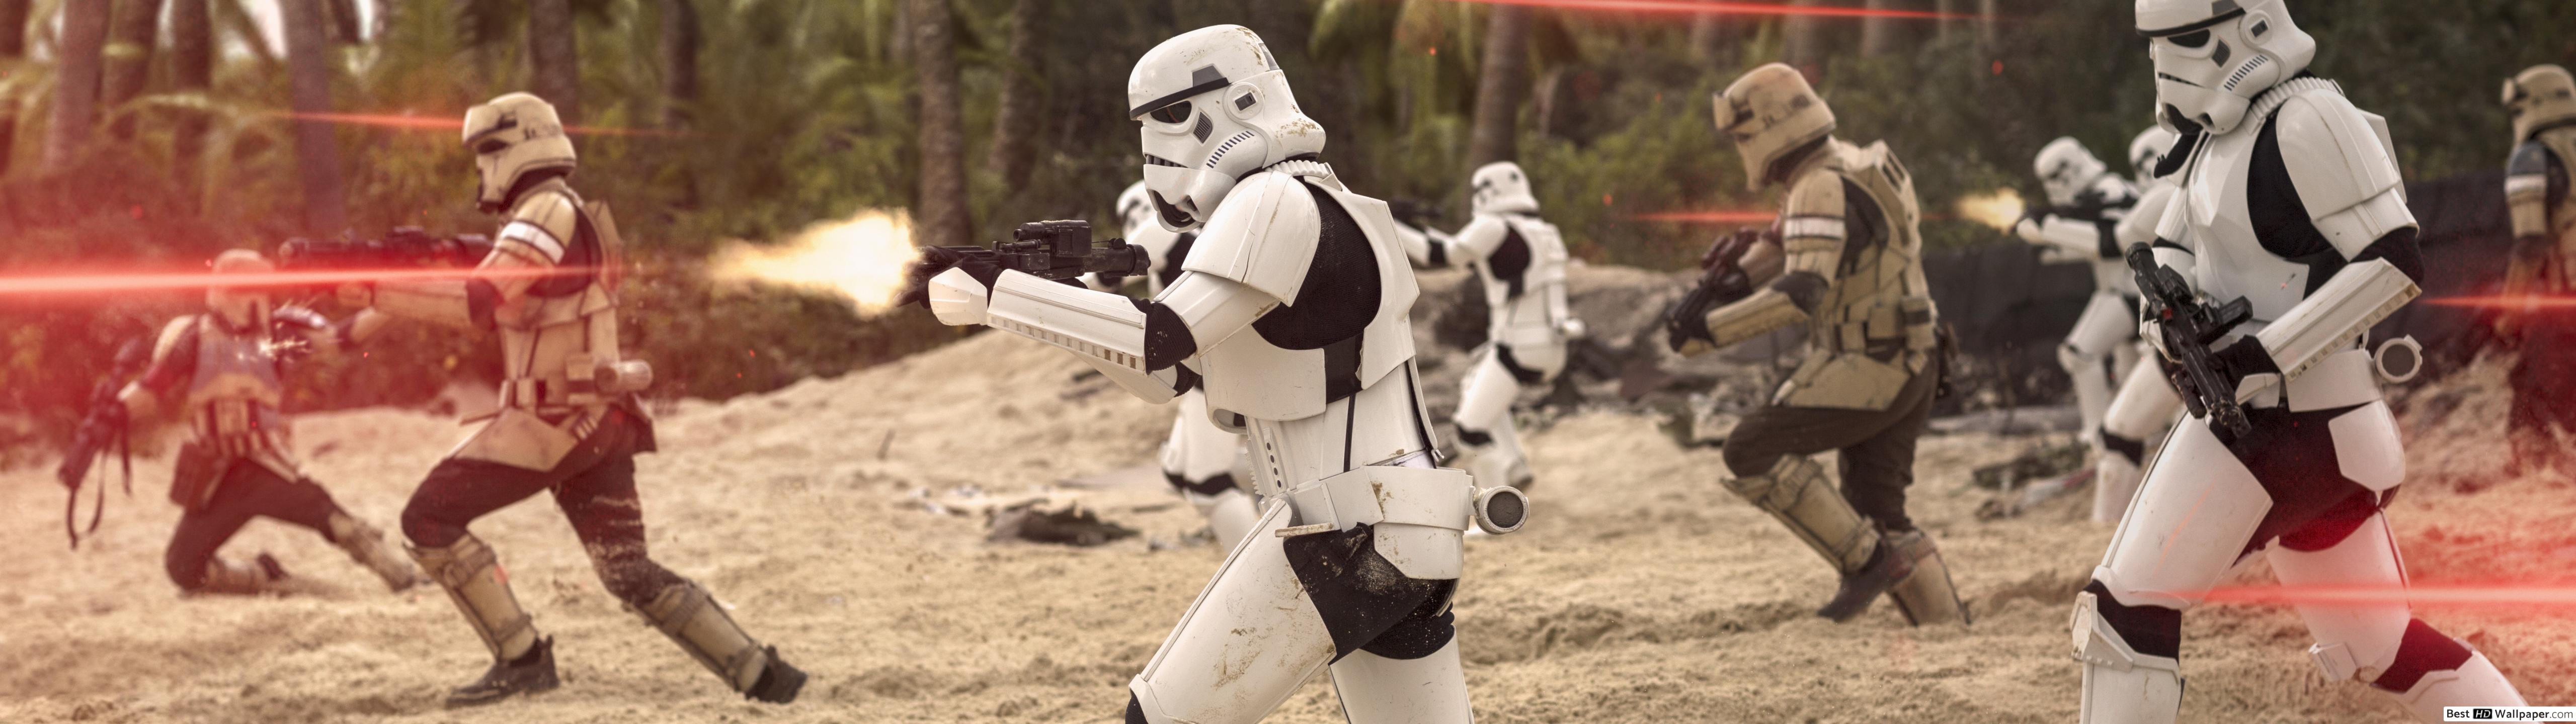 Rogue One: A Star Wars Story, Deadsquad War Time HD wallpaper download